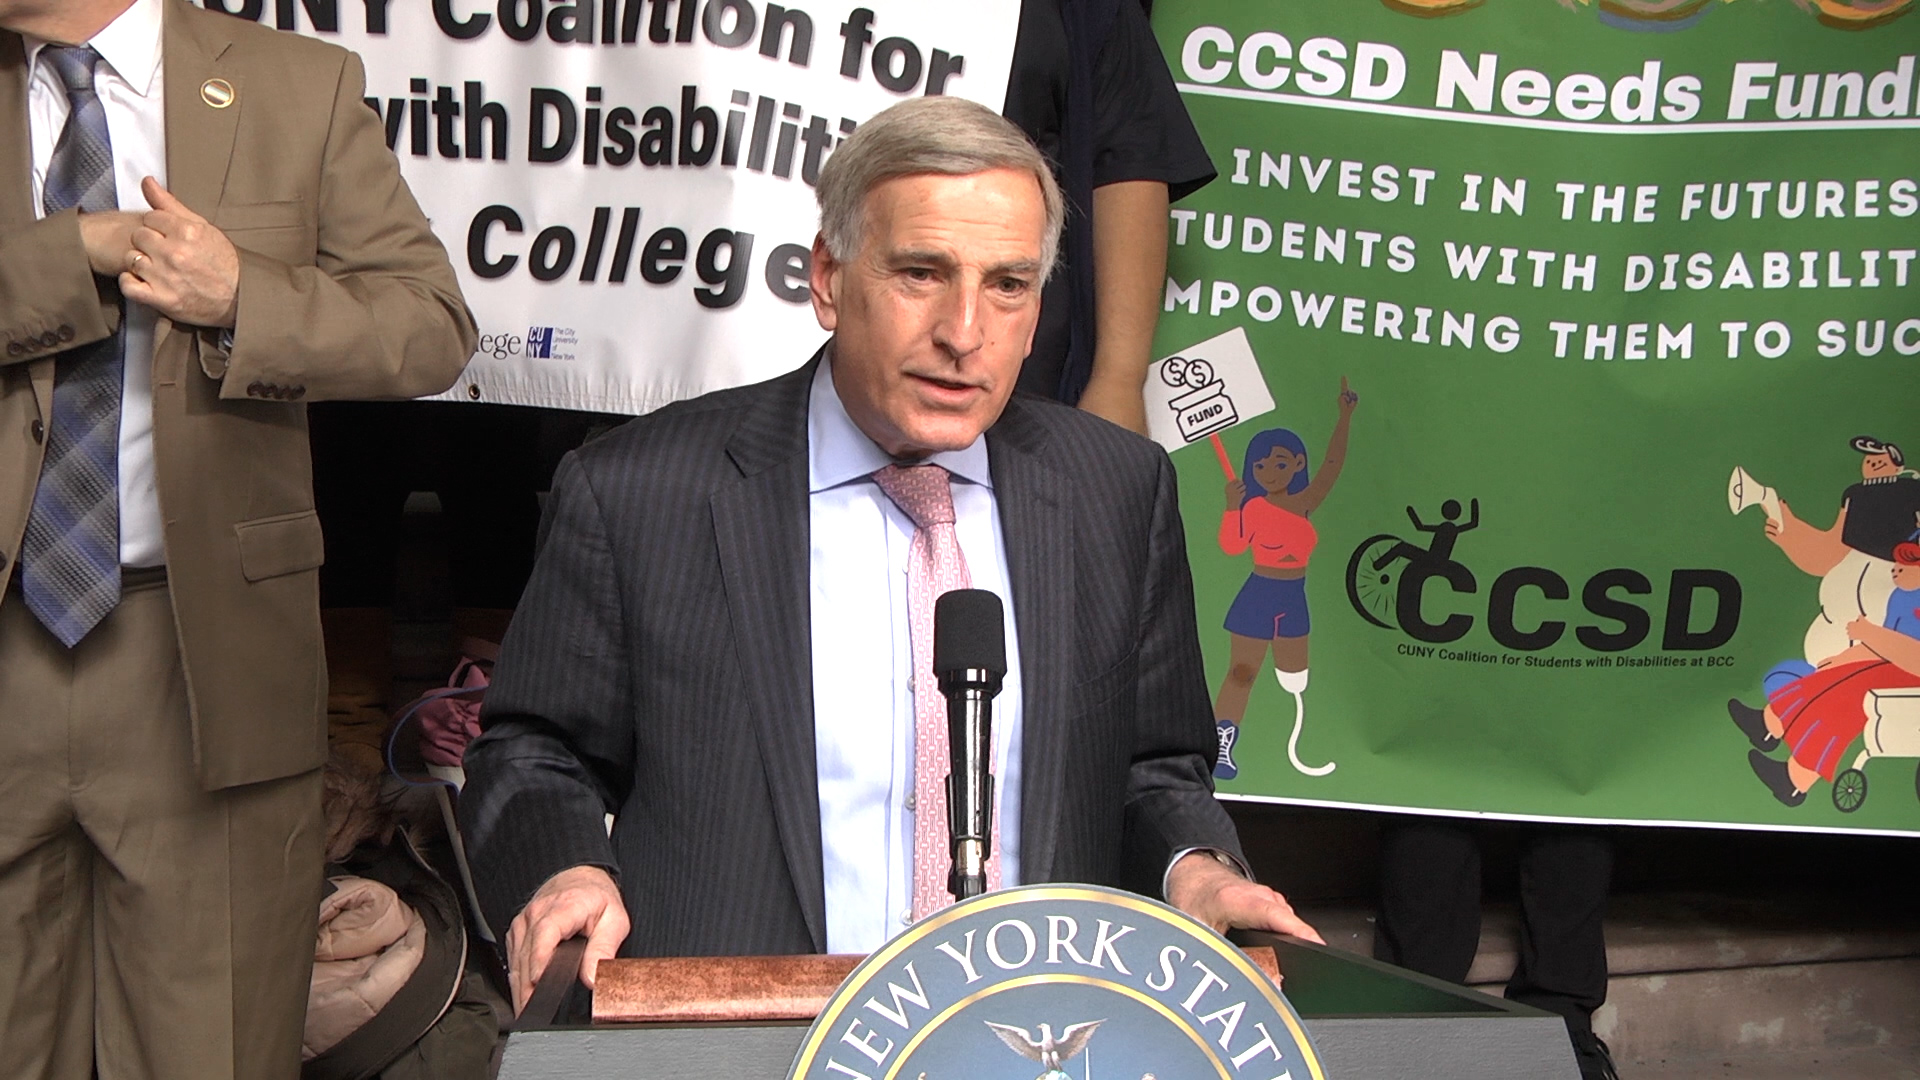 Albany Rally to Advocate for Students with Disabilities